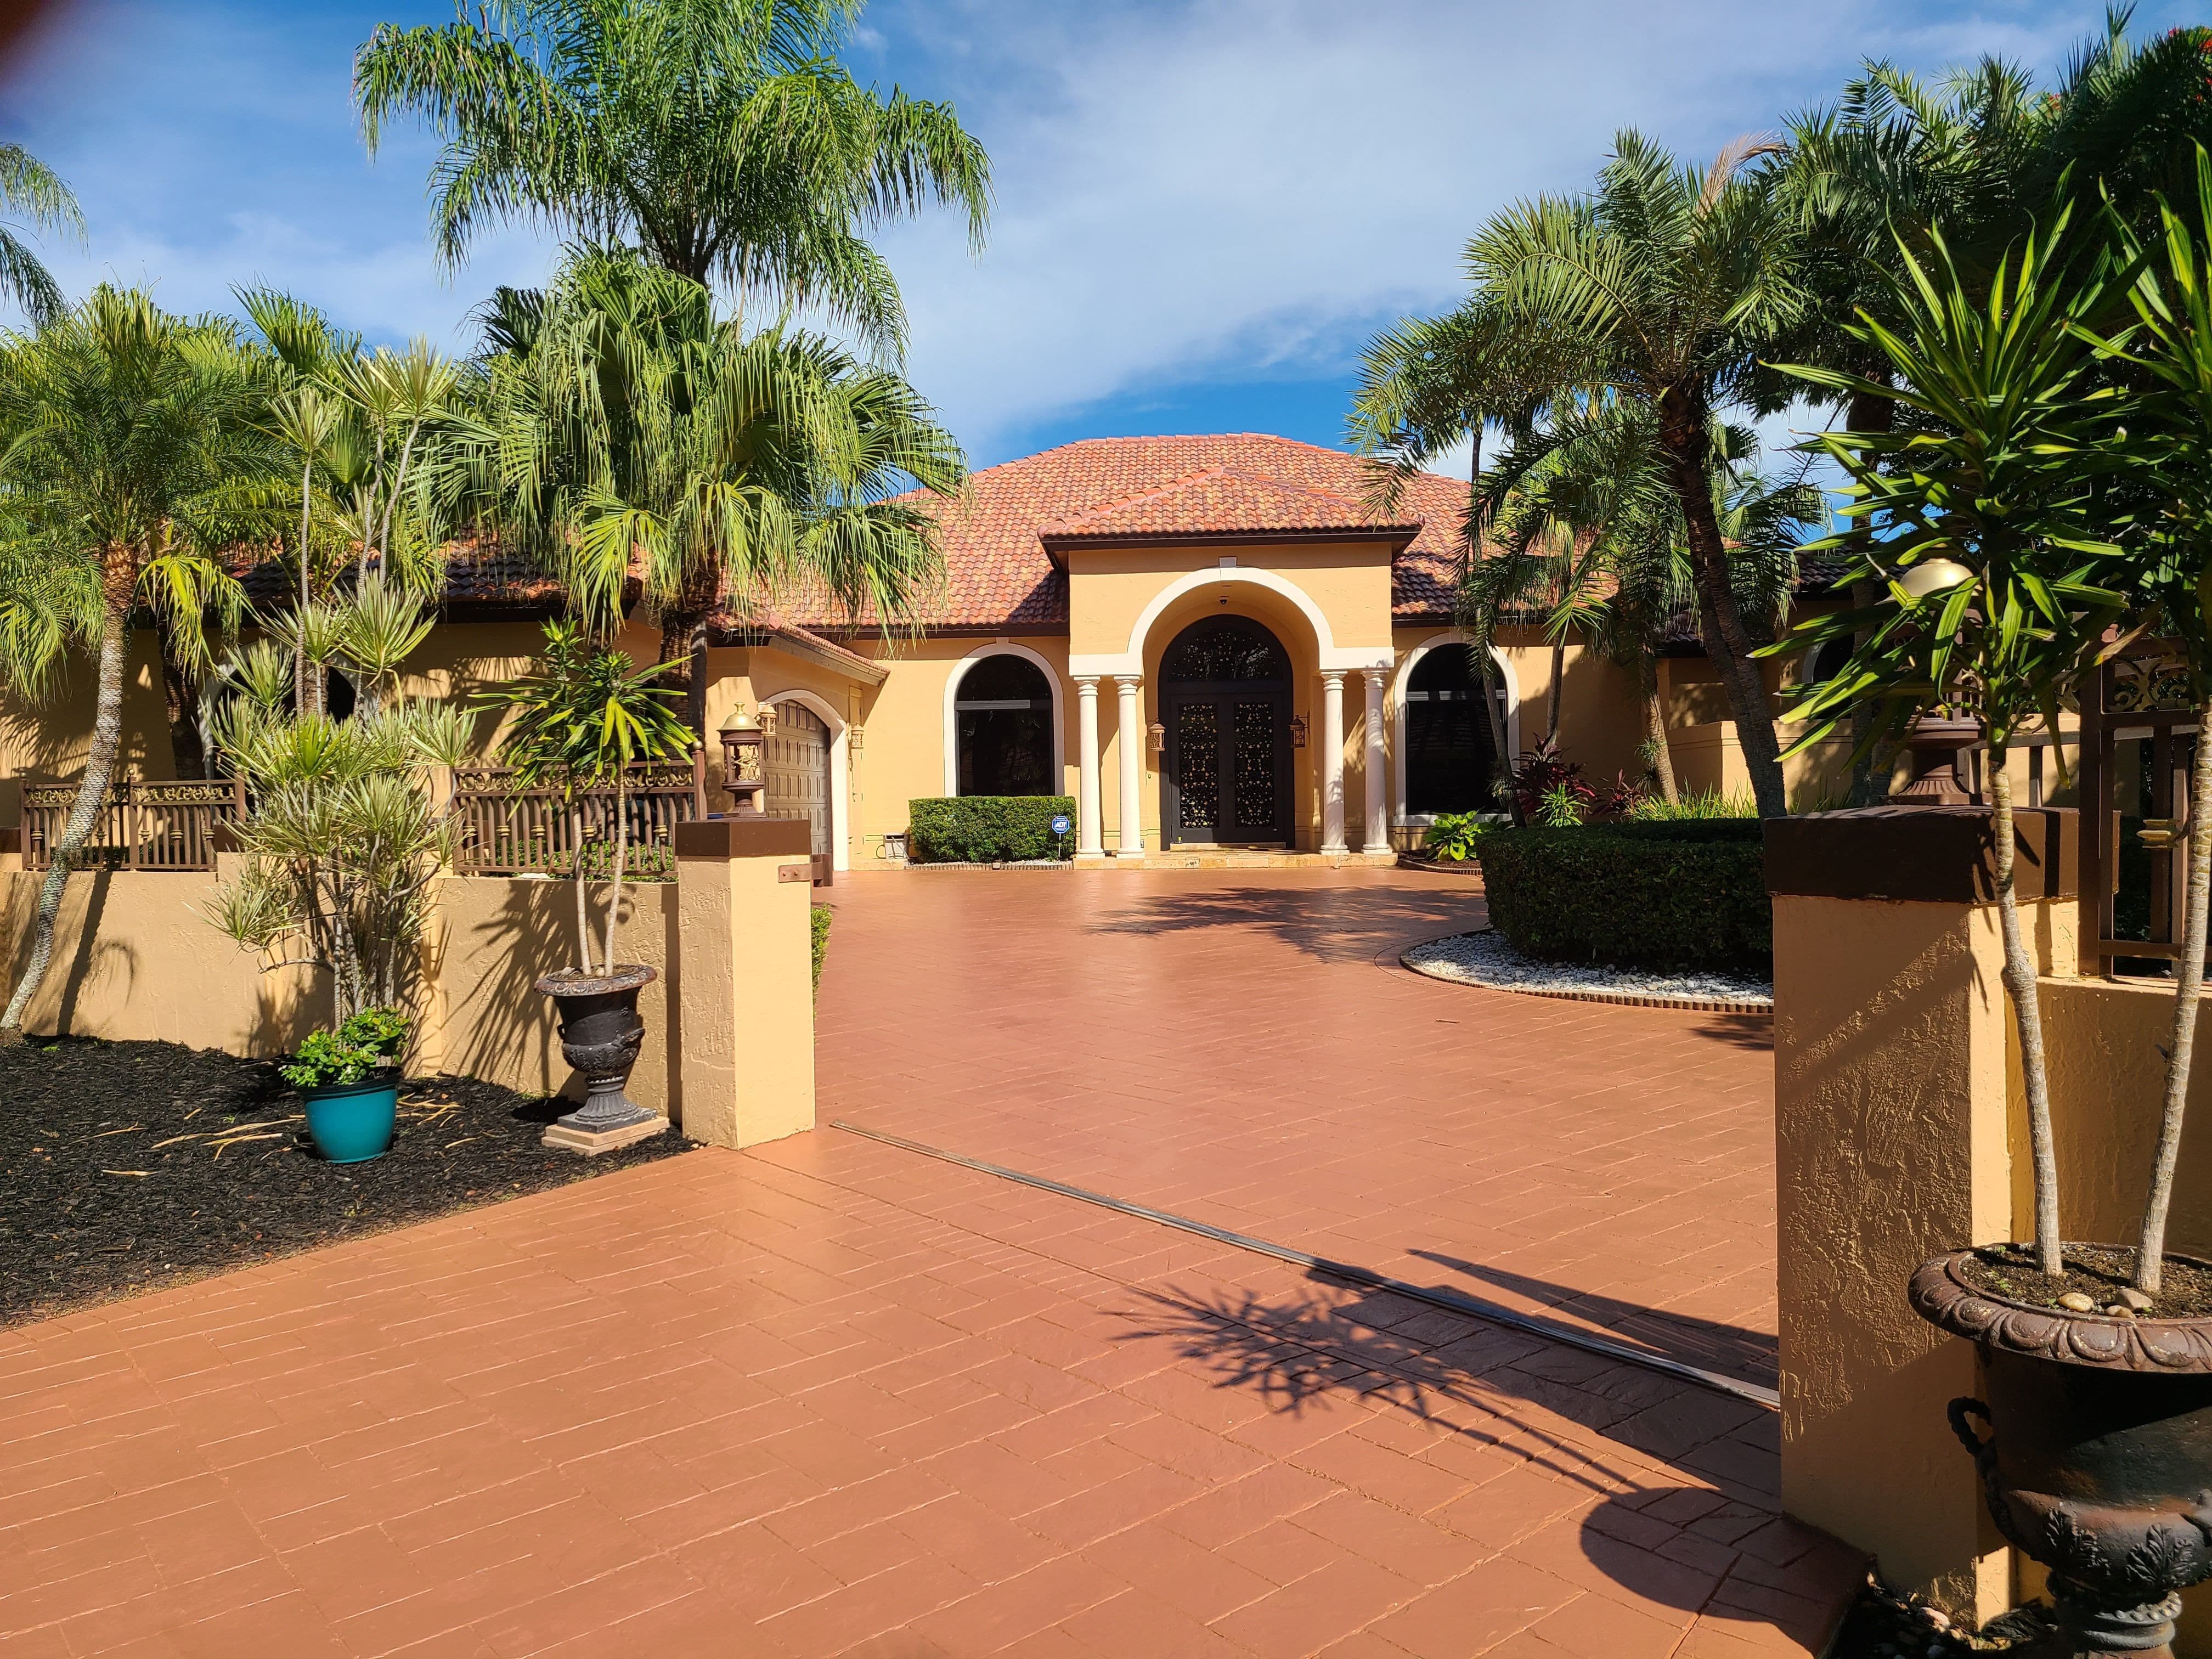 Miami Painting Contractors assures quality with a warranty on all painting services, including our dedicated commercial painting offerings in Miami. 